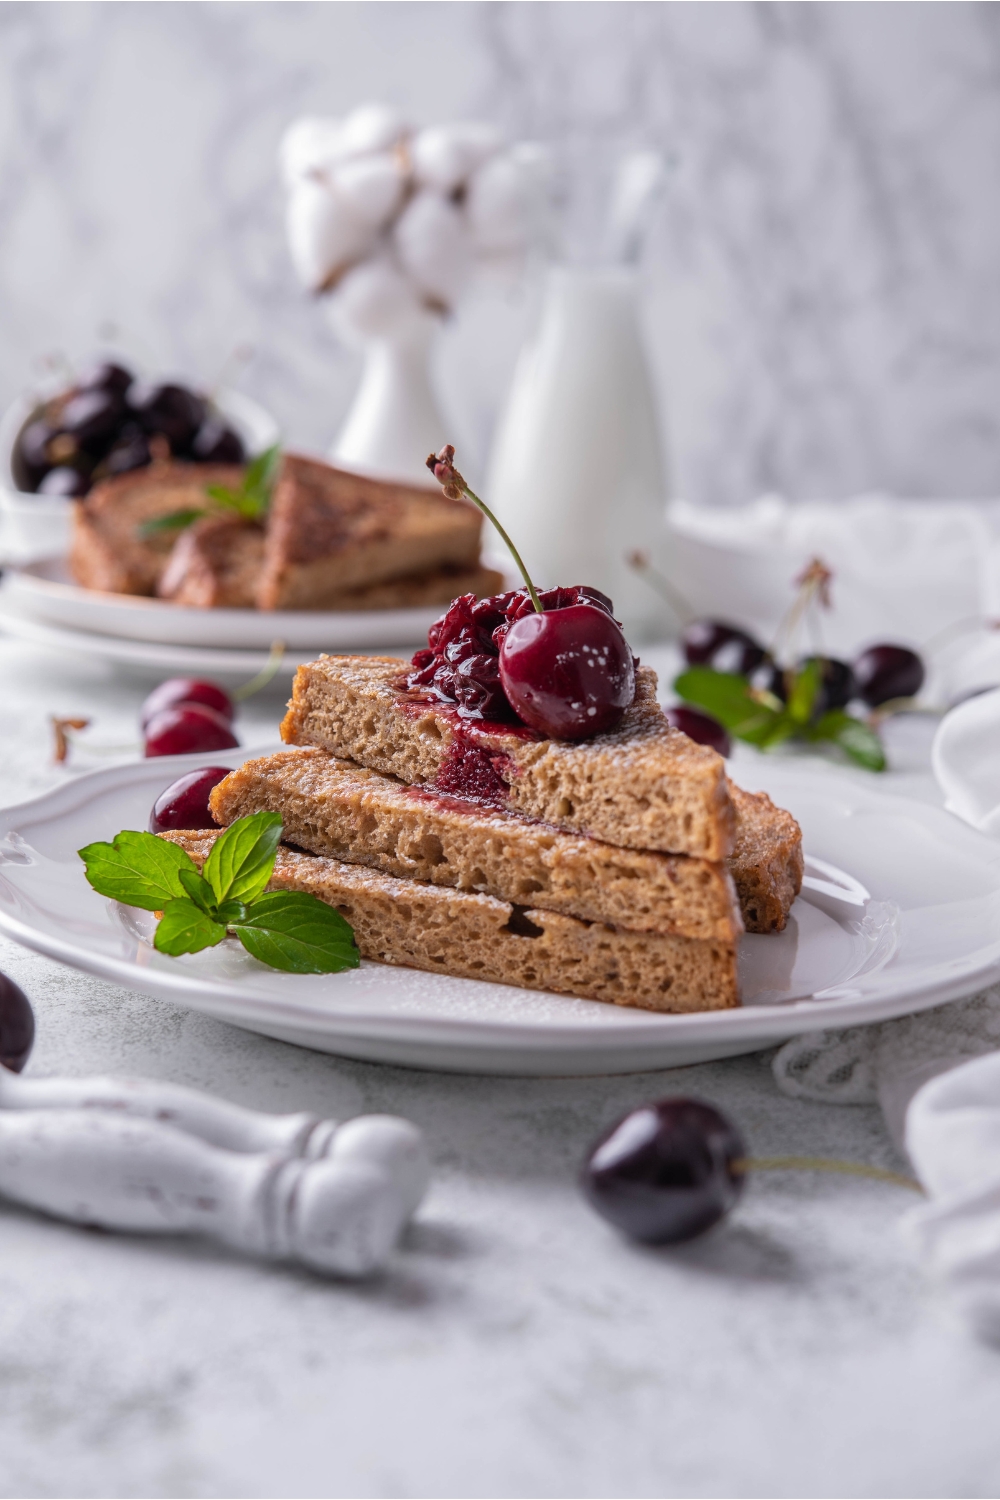 A stack of three pieces of French toast topped with cherry compote, a single cherry, and a mint sprig.